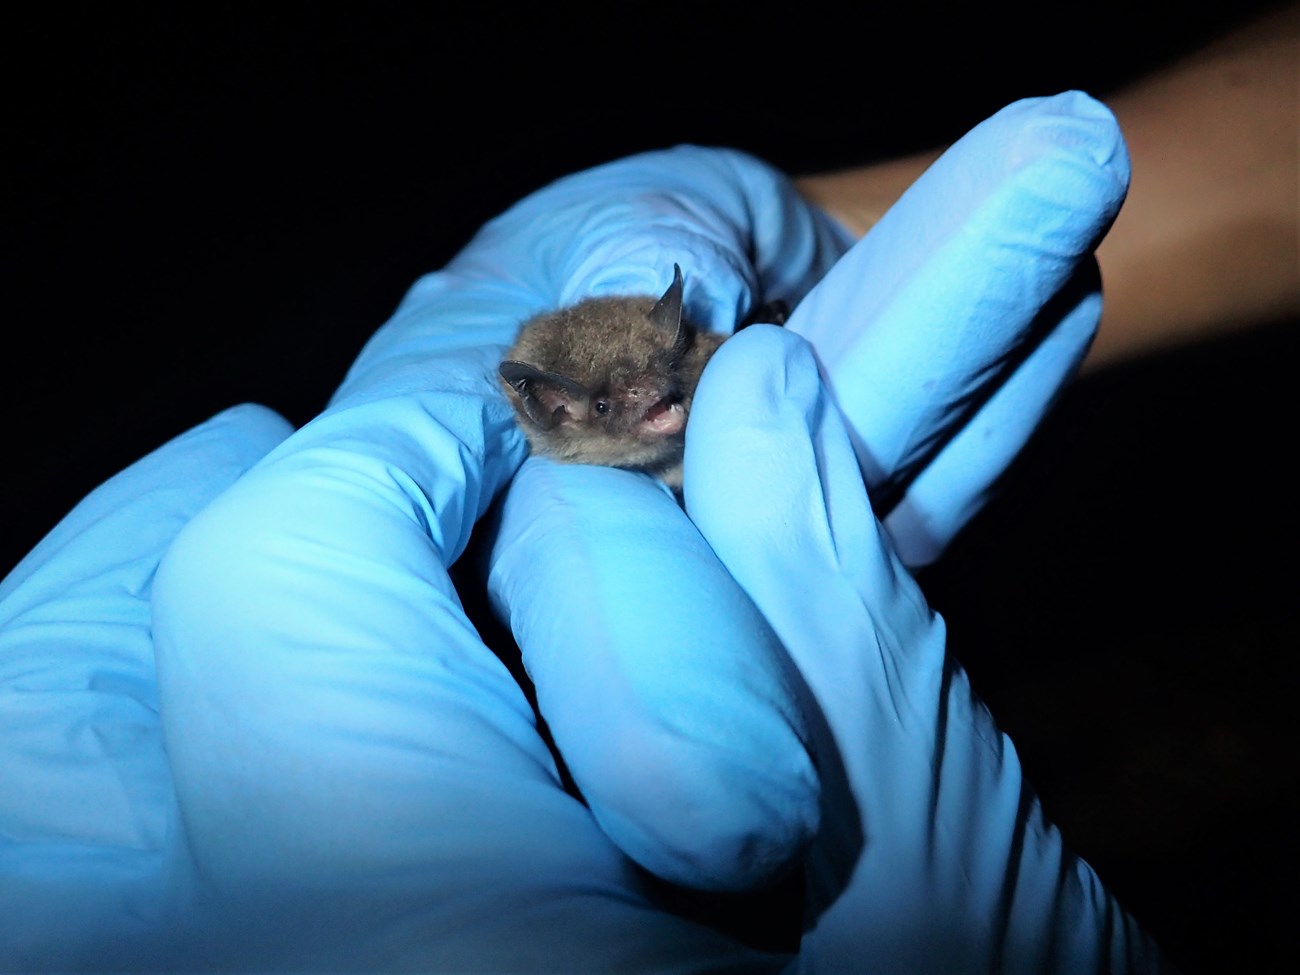 A small brown bat is held by a person wearing gloves.